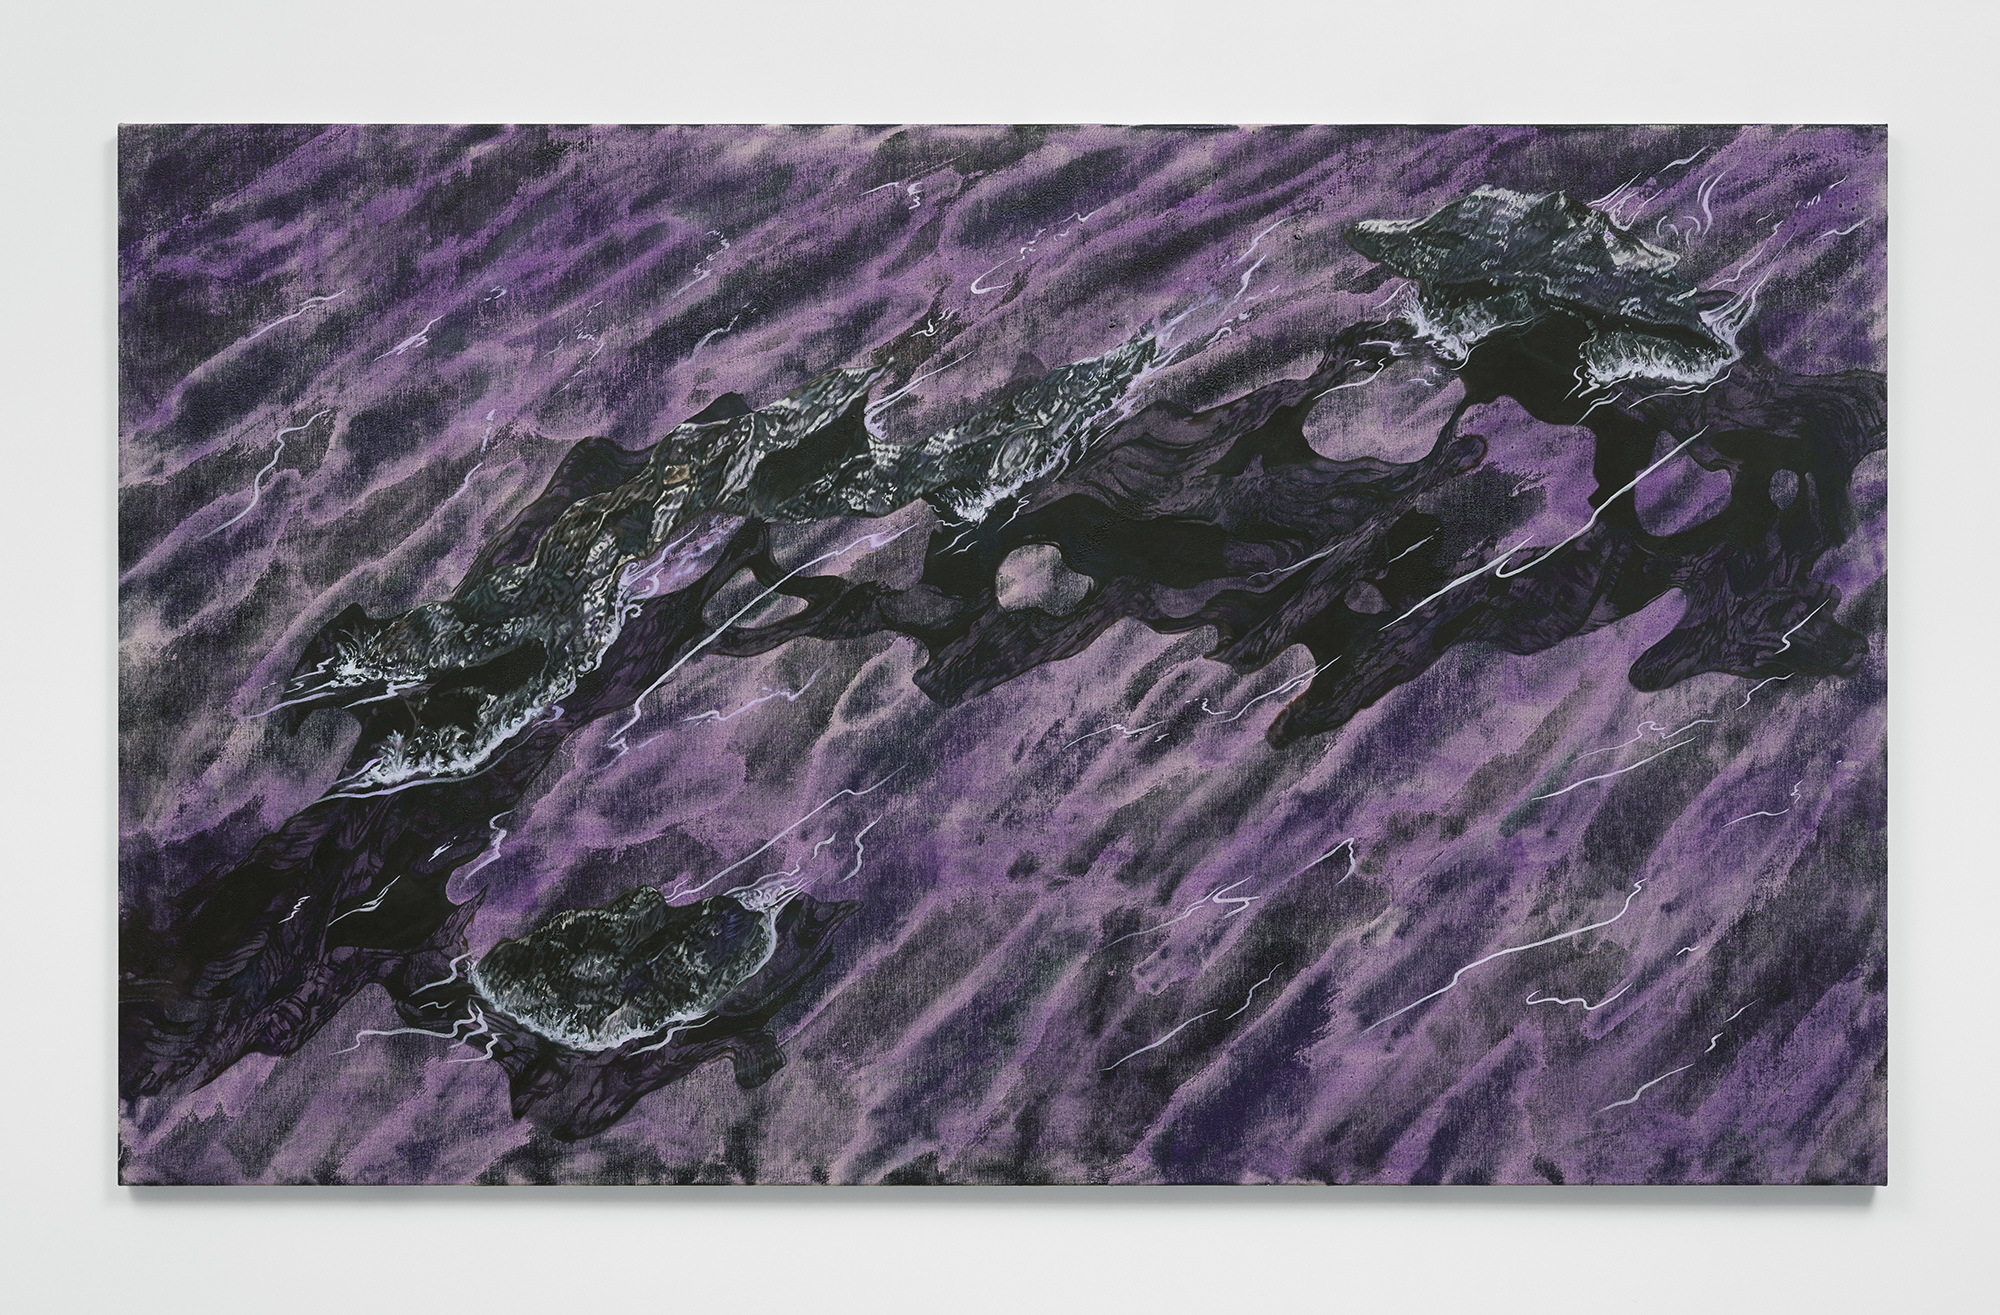 Michael Ho, Flood the Spirits, Shake the Bones, 2023, Oil and acrylic on canvas, 135 x 225 cm, 53 1/8 x 88 5/8 in.